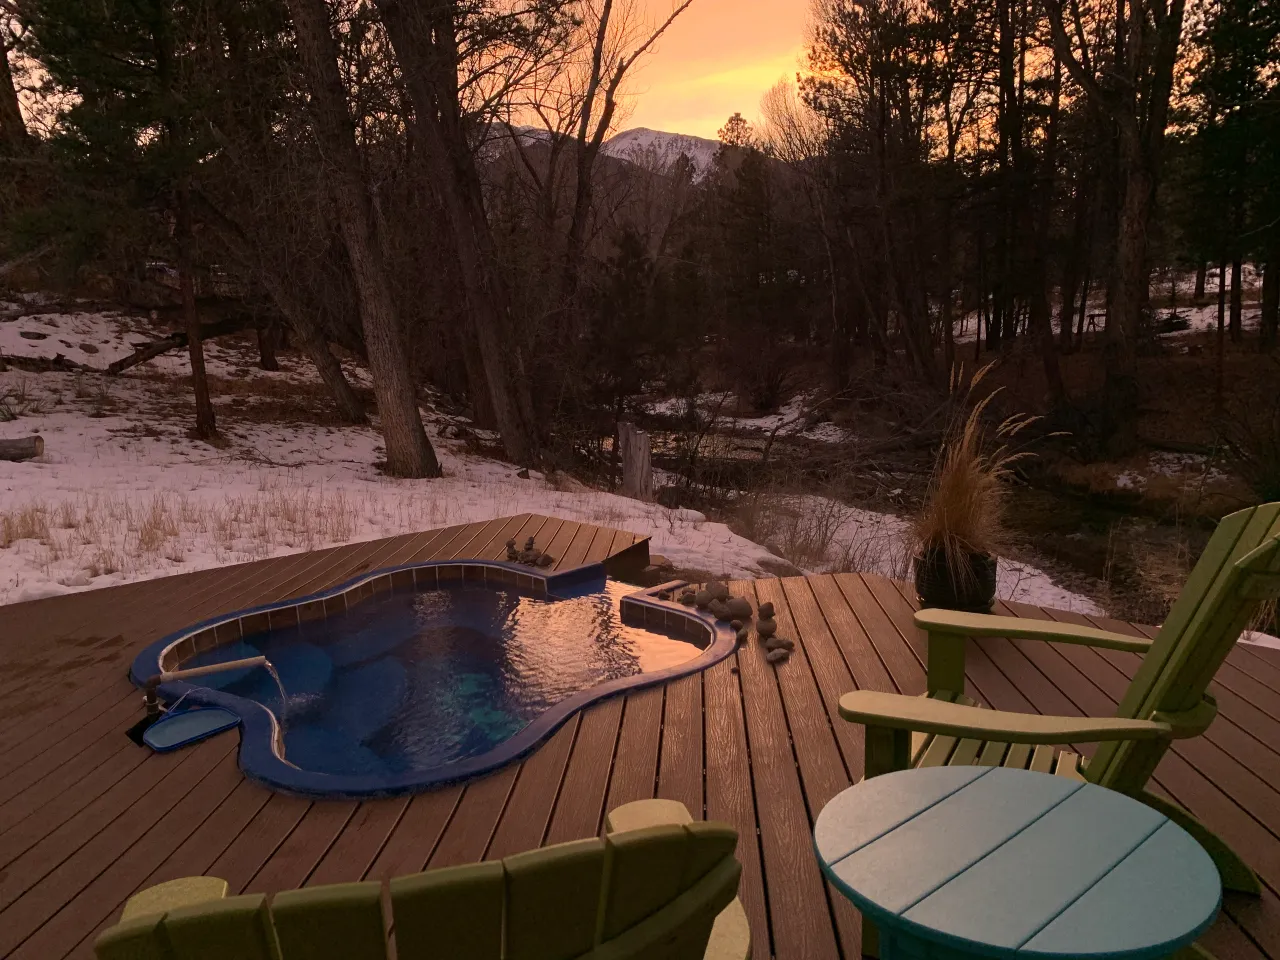 Aqua, one of the best hot springs in Colorado